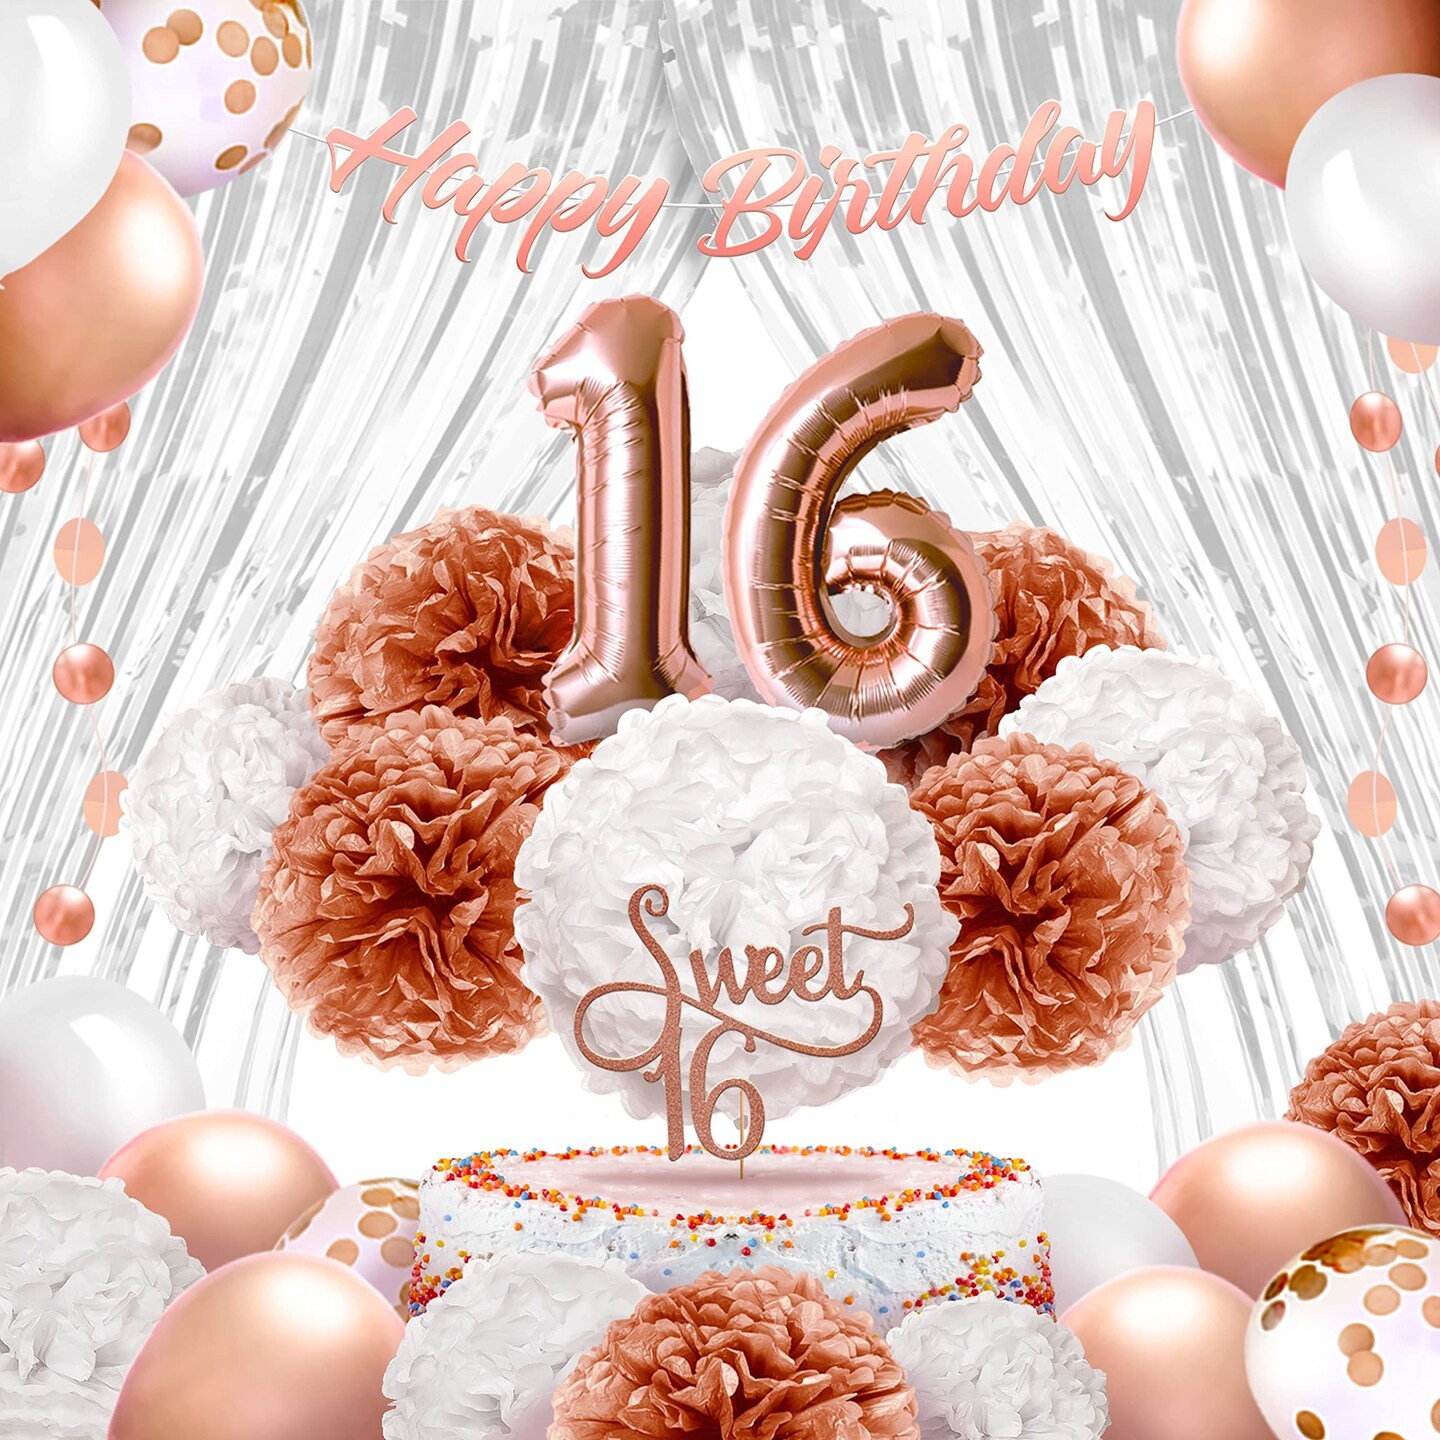 EpiqueOne 41-Piece Rose Gold Sweet 16 Birthday Decoration for Girls | Includes Happy Birthday Banner, Cake Topper, Tissue Pom Poms &#x26; More | Easy to Set Up | Also Ideal for Bridal &#x26; Baby Showers &#x26; More